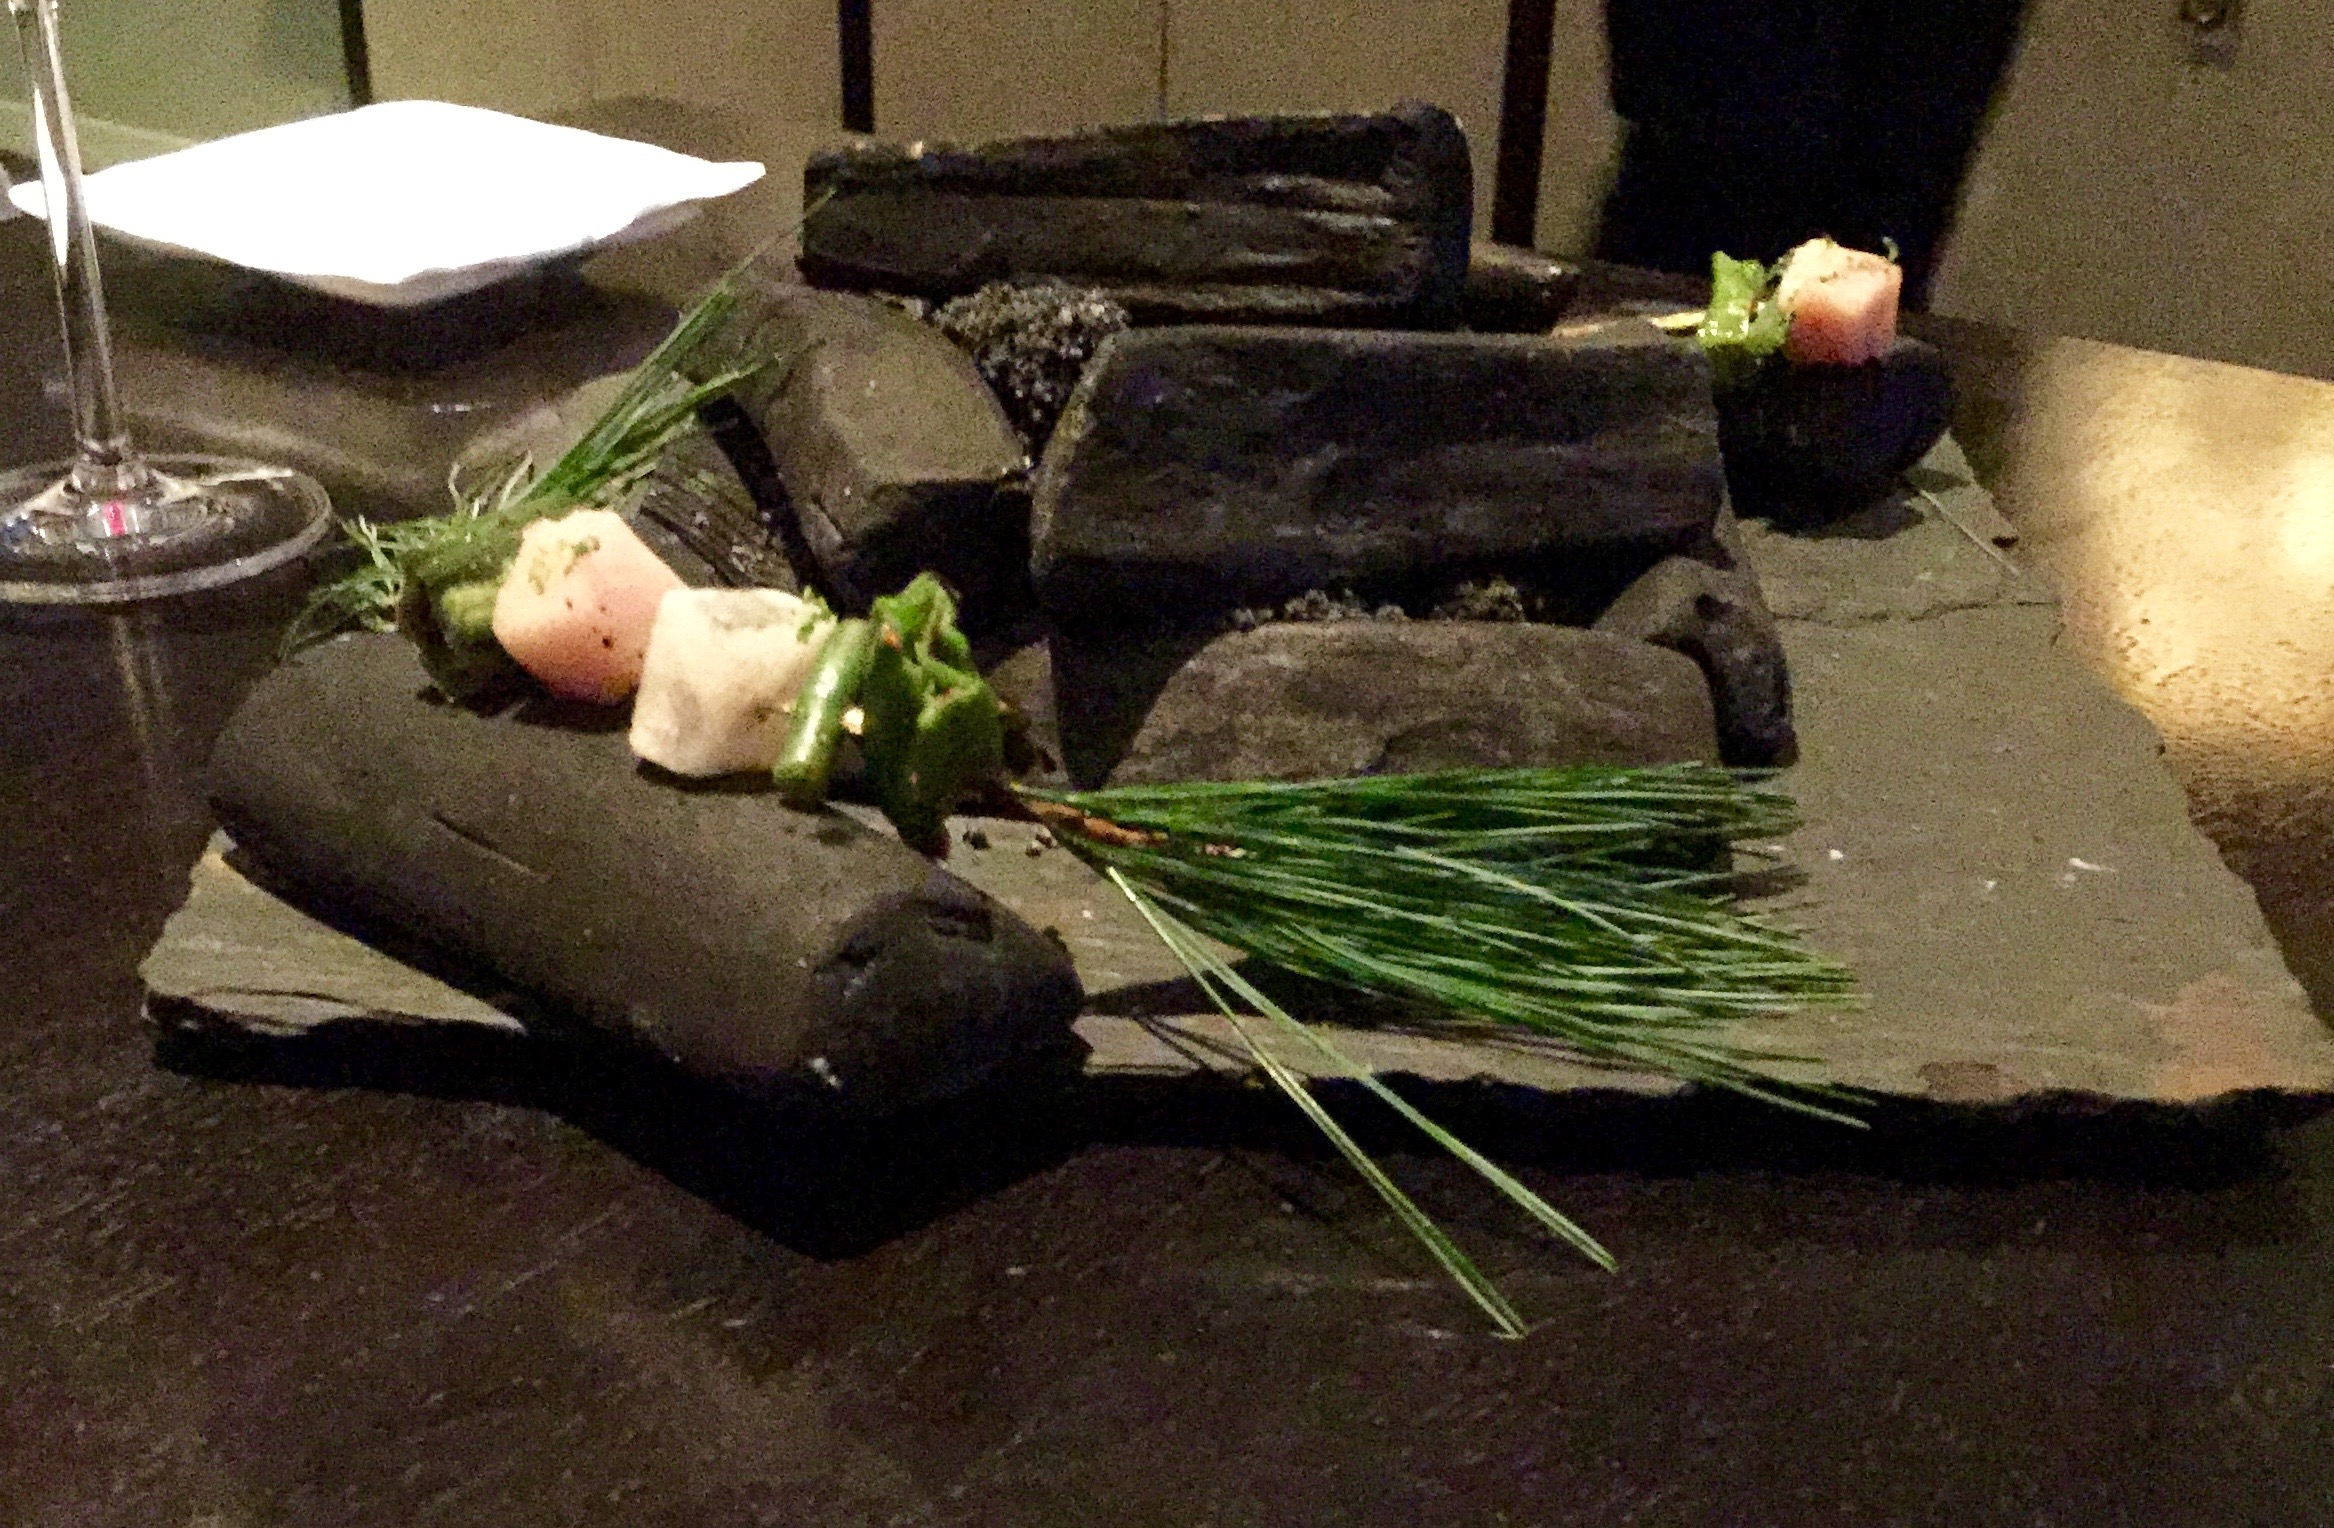 Picture of a course at Alinea